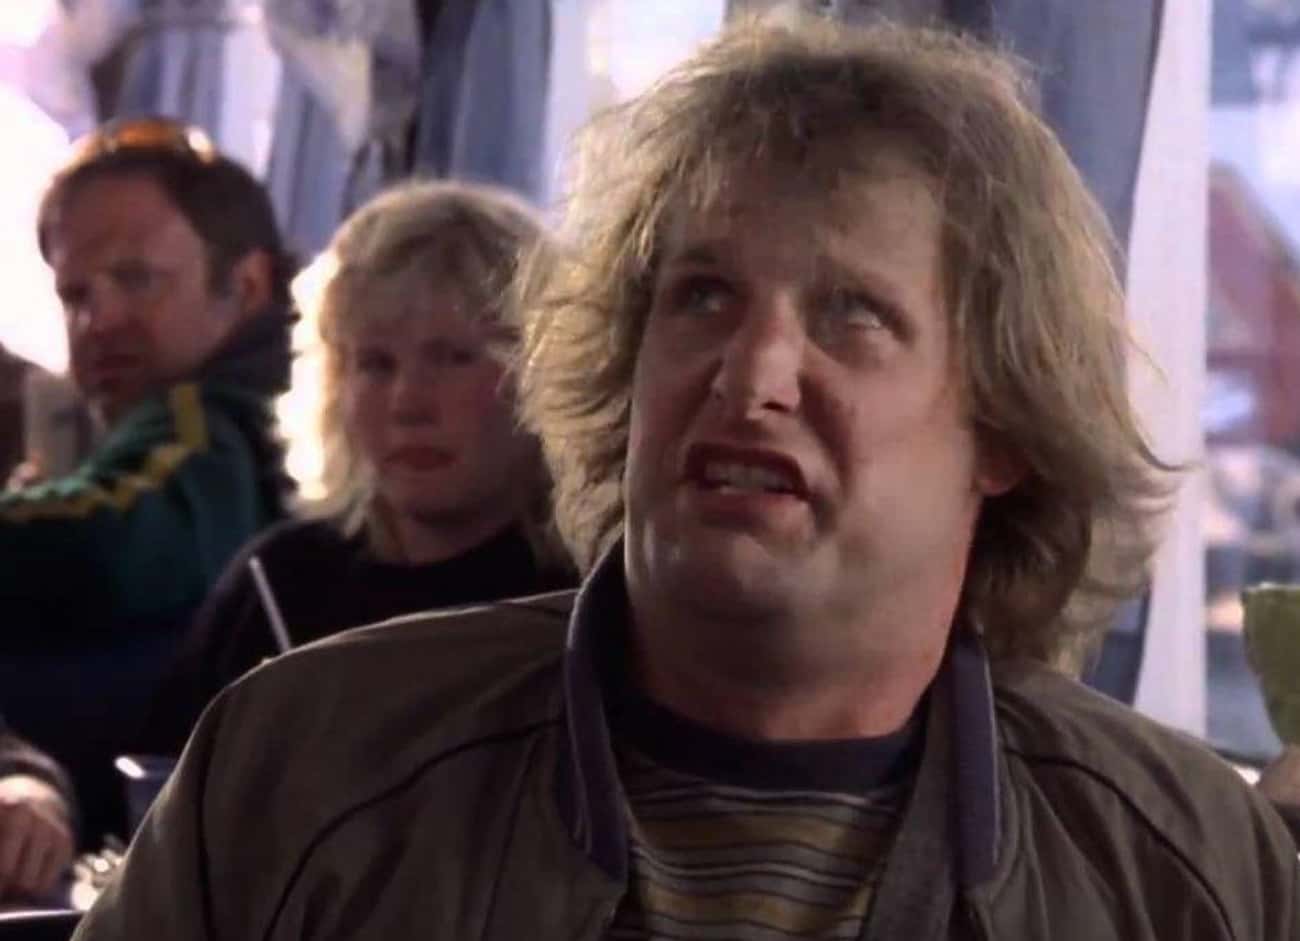 The Key For Jeff Daniels’s Performance Was To Actually Define His Character’s IQ